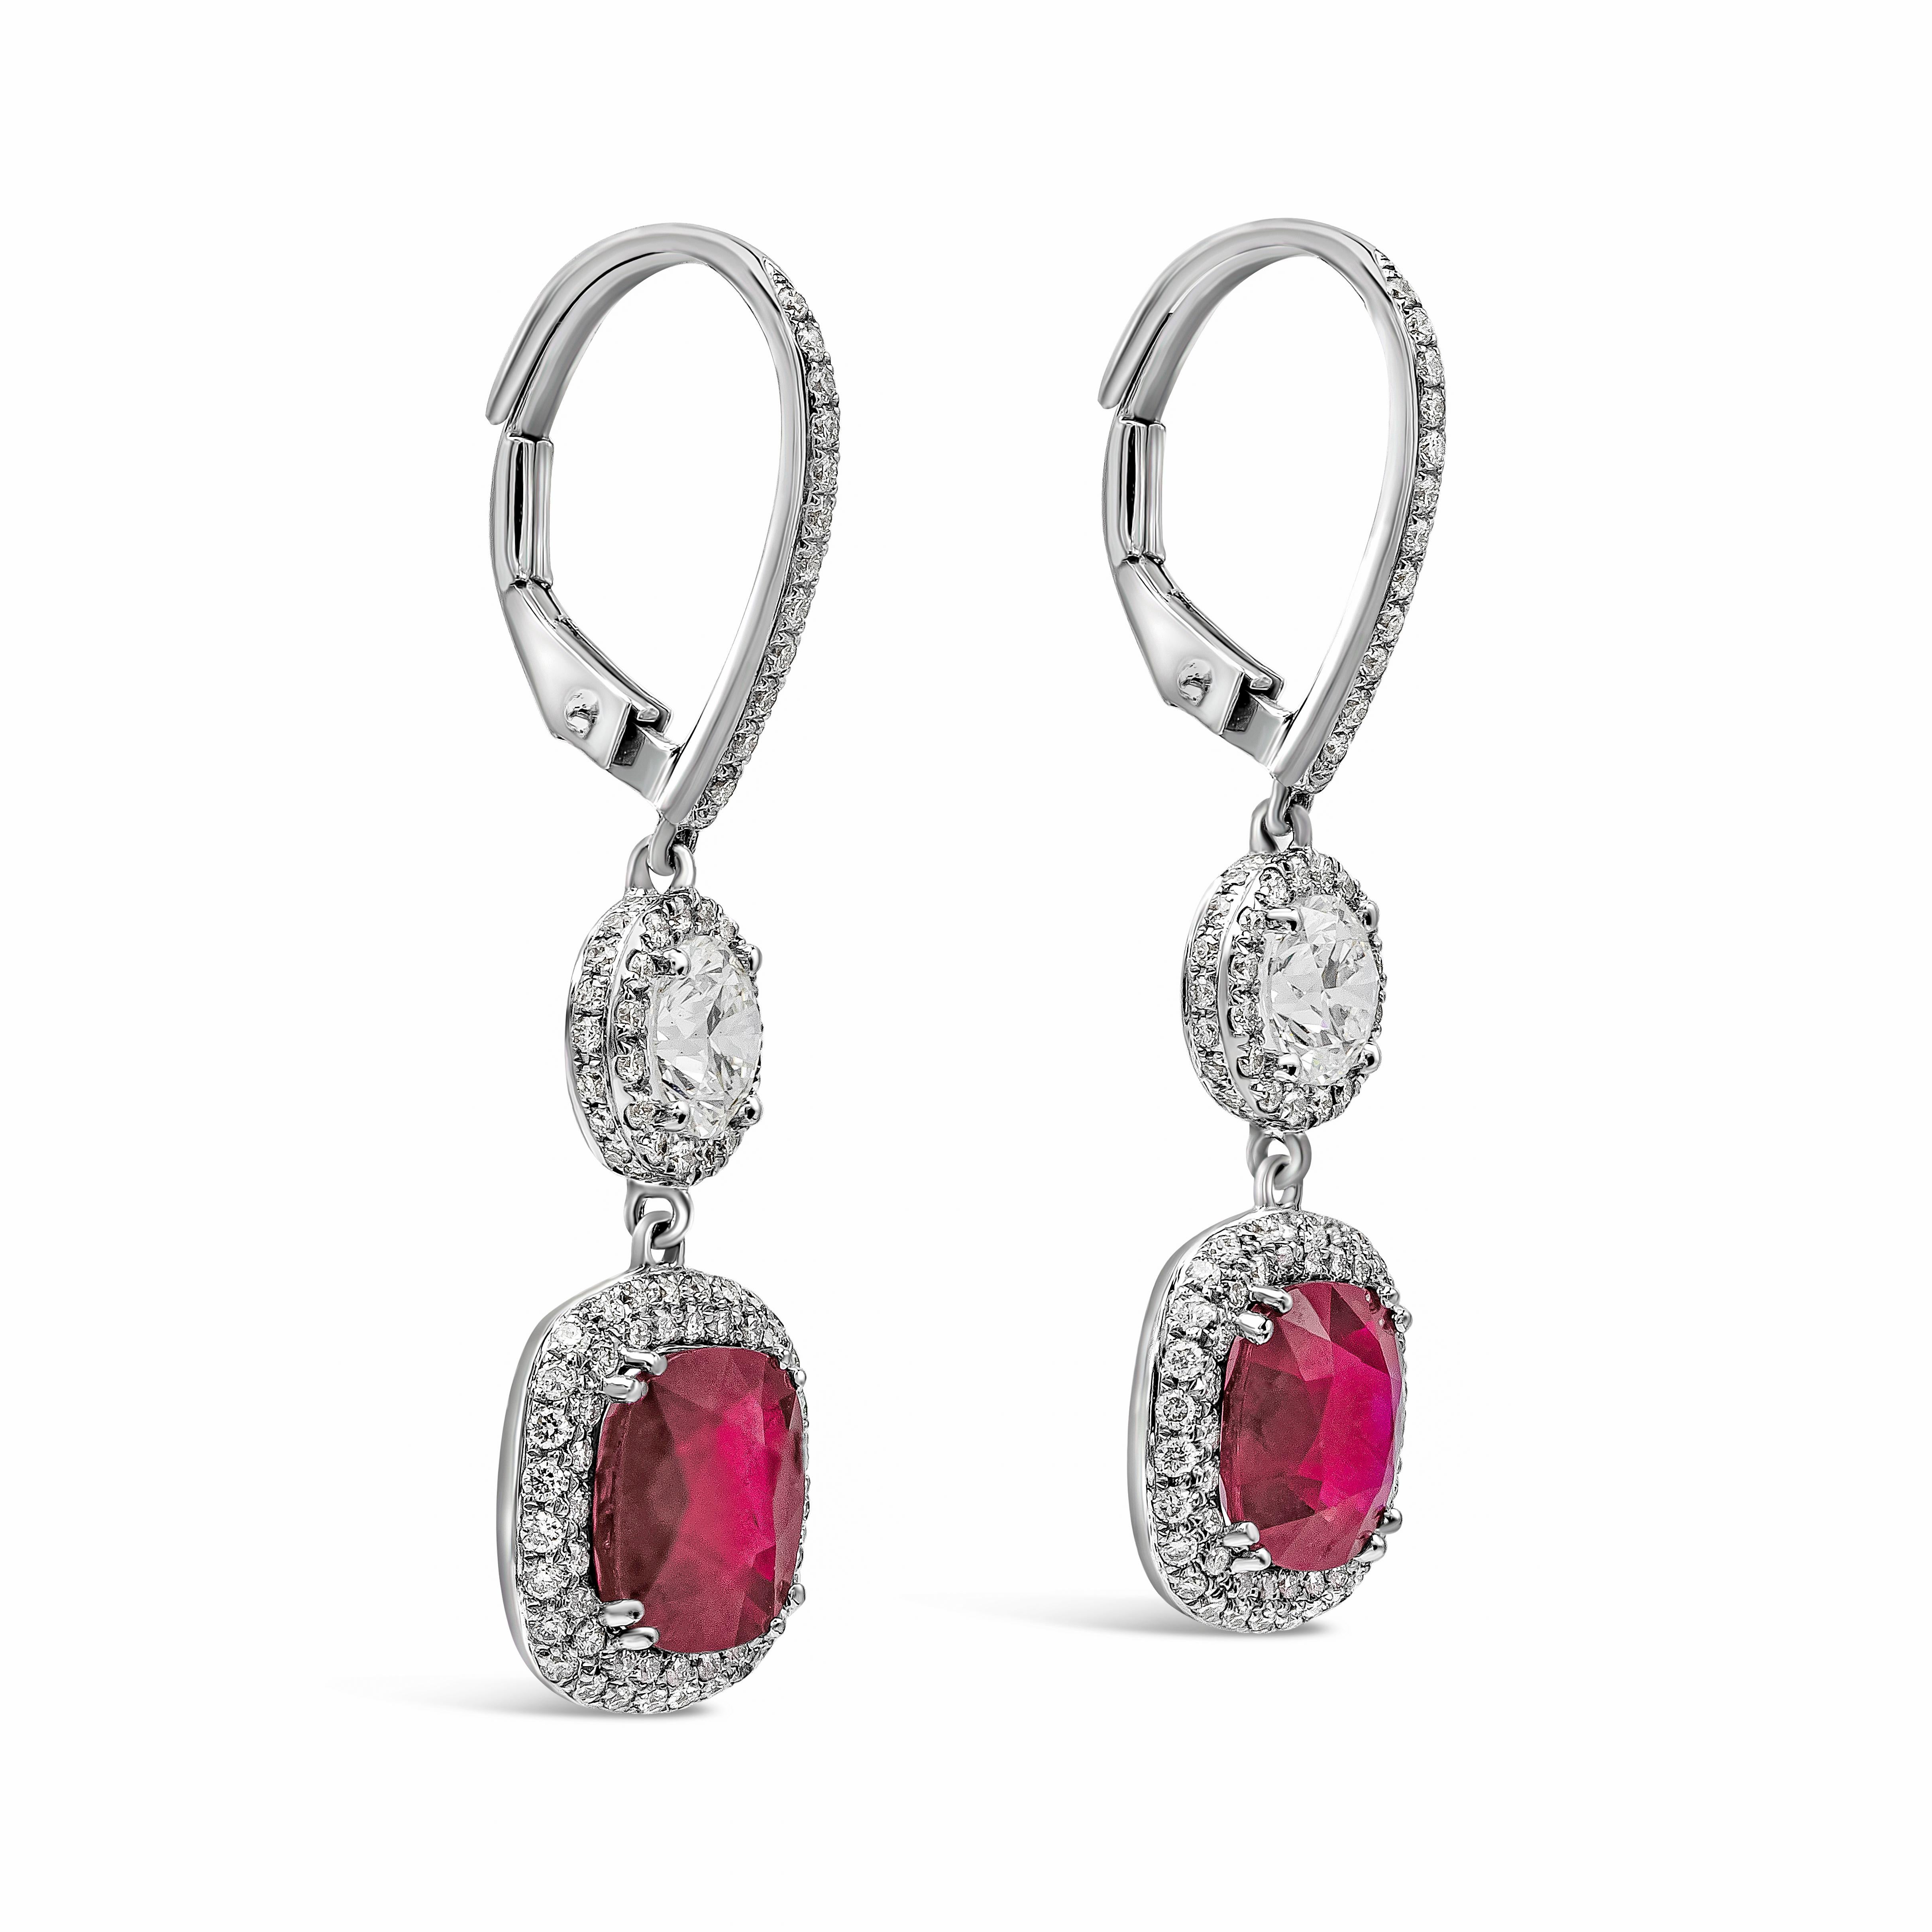 These gorgeous earrings feature 2 cushion cut rubies weighing 4.15 carats total and accented with brilliant round diamonds in a micro-pave setting. Suspended on a round brilliant diamond weighing 0.89 carats with a single row of round melee diamonds